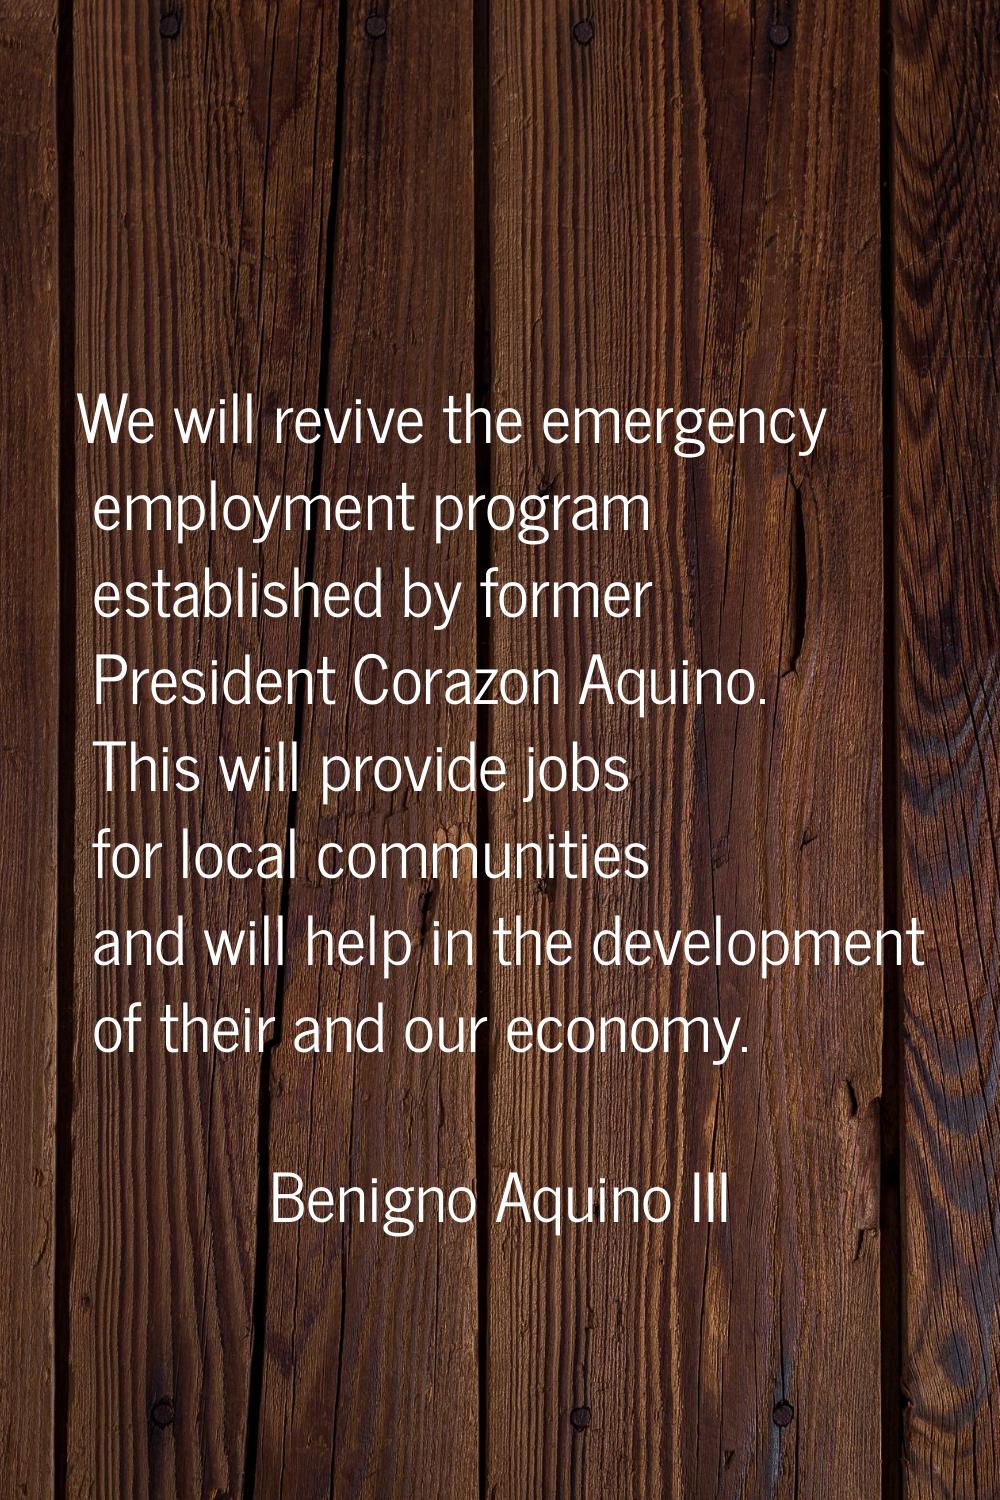 We will revive the emergency employment program established by former President Corazon Aquino. Thi